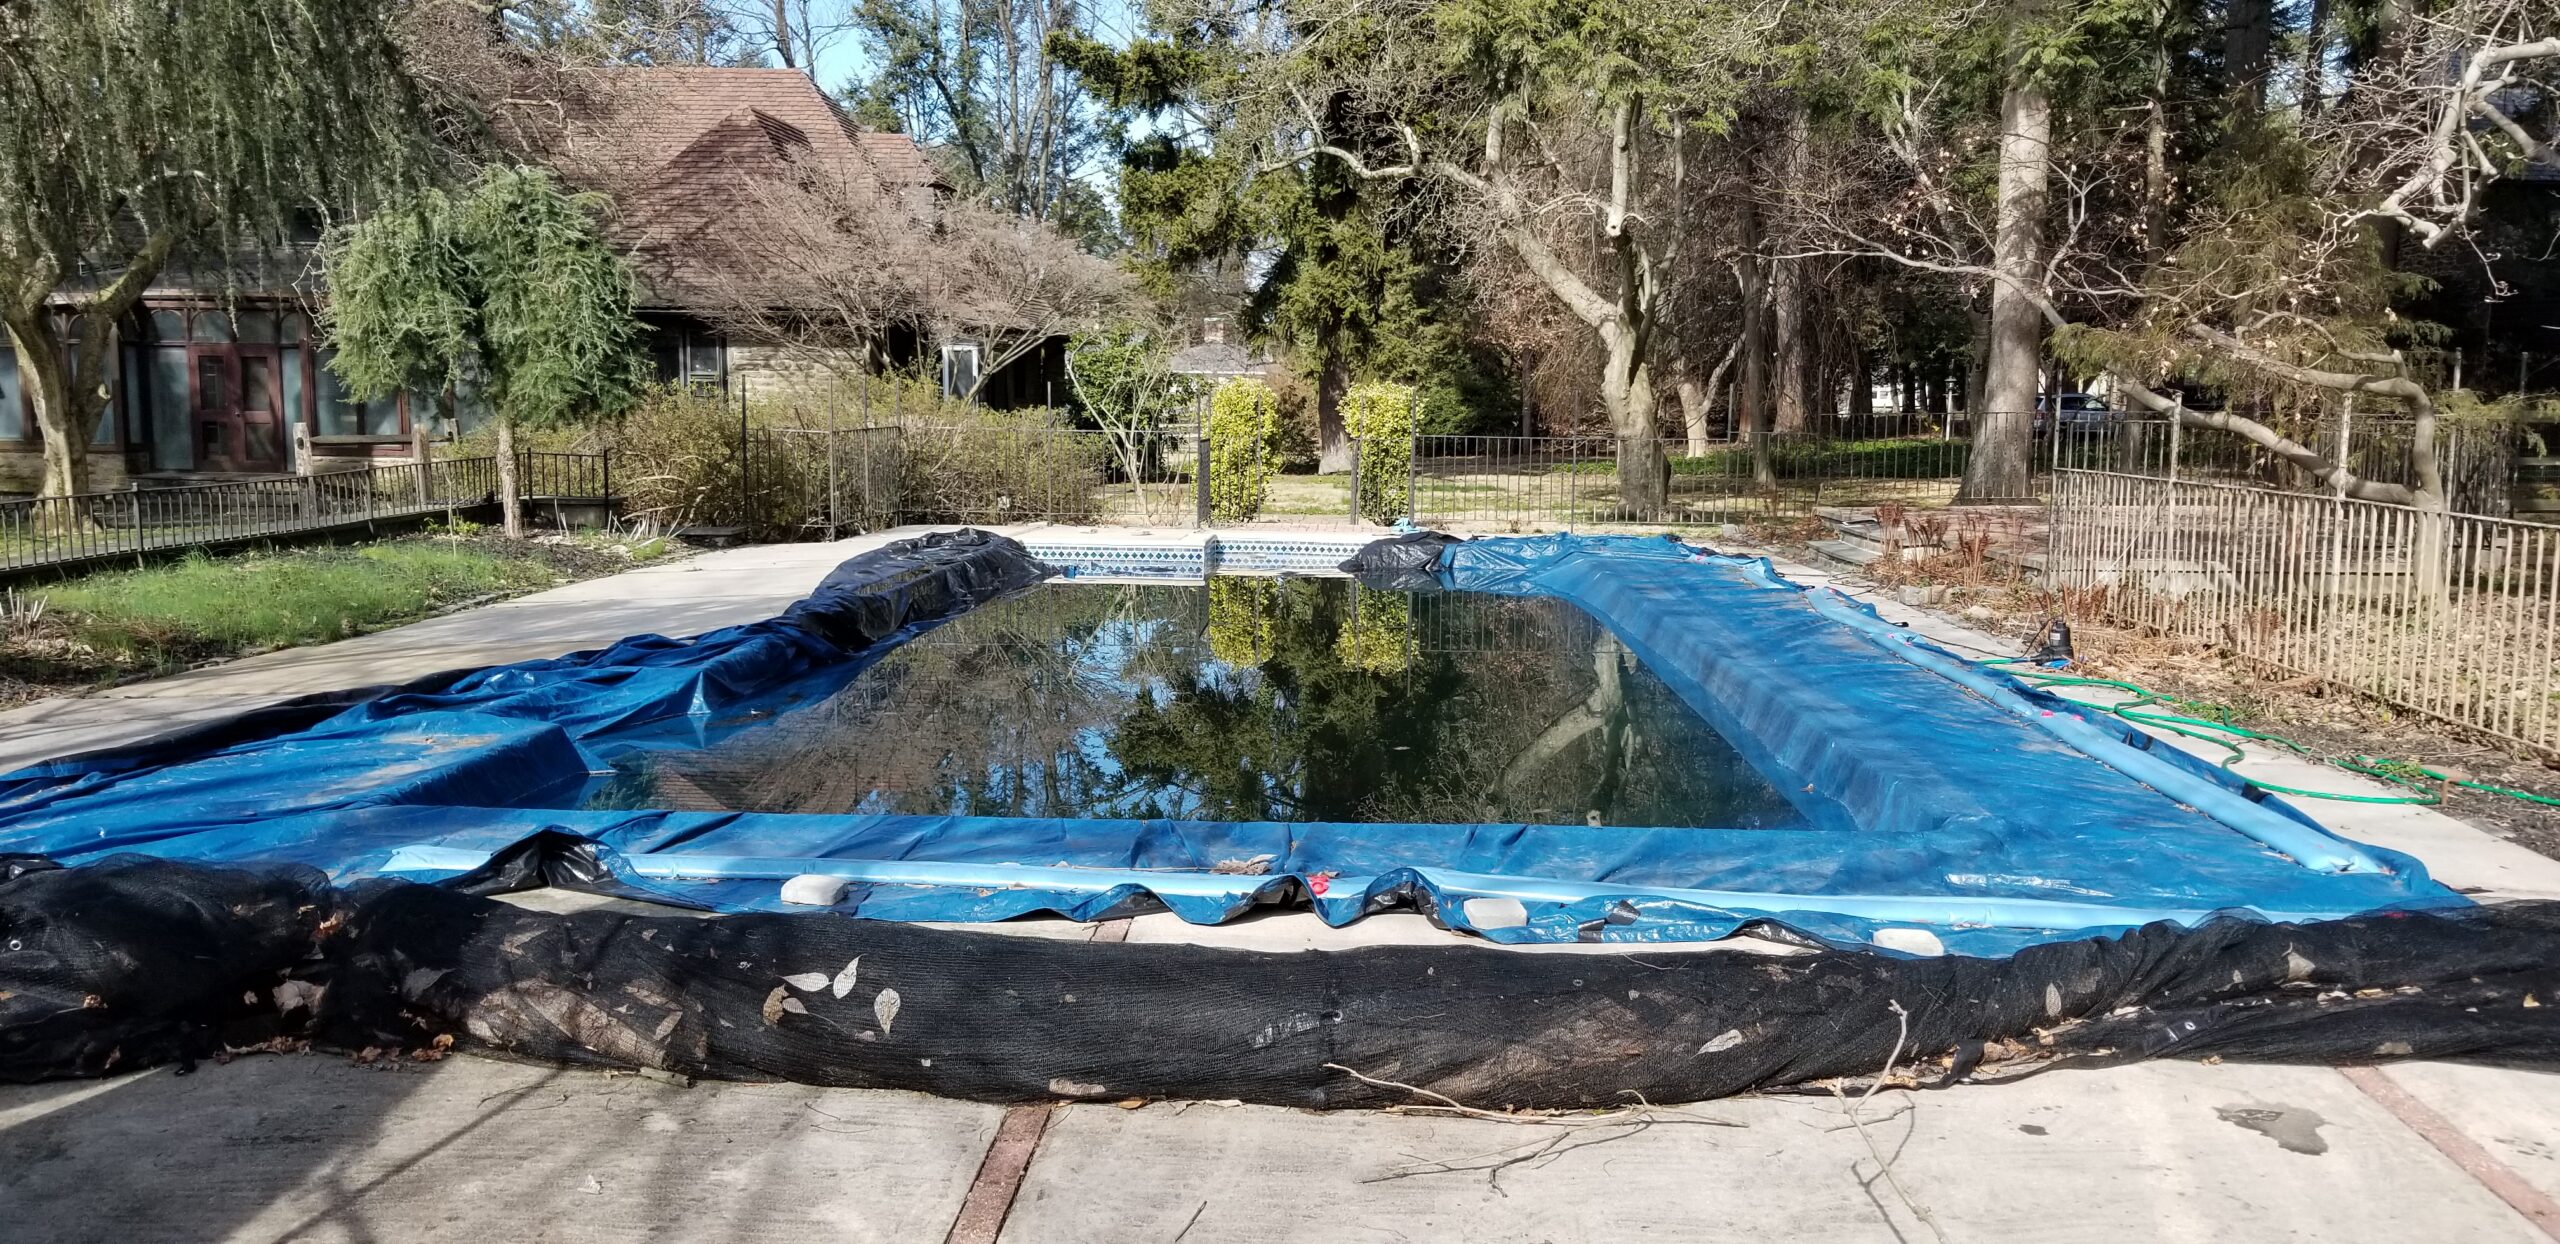 Restocking Pool Supplies: What You Need When Reopening After Winter